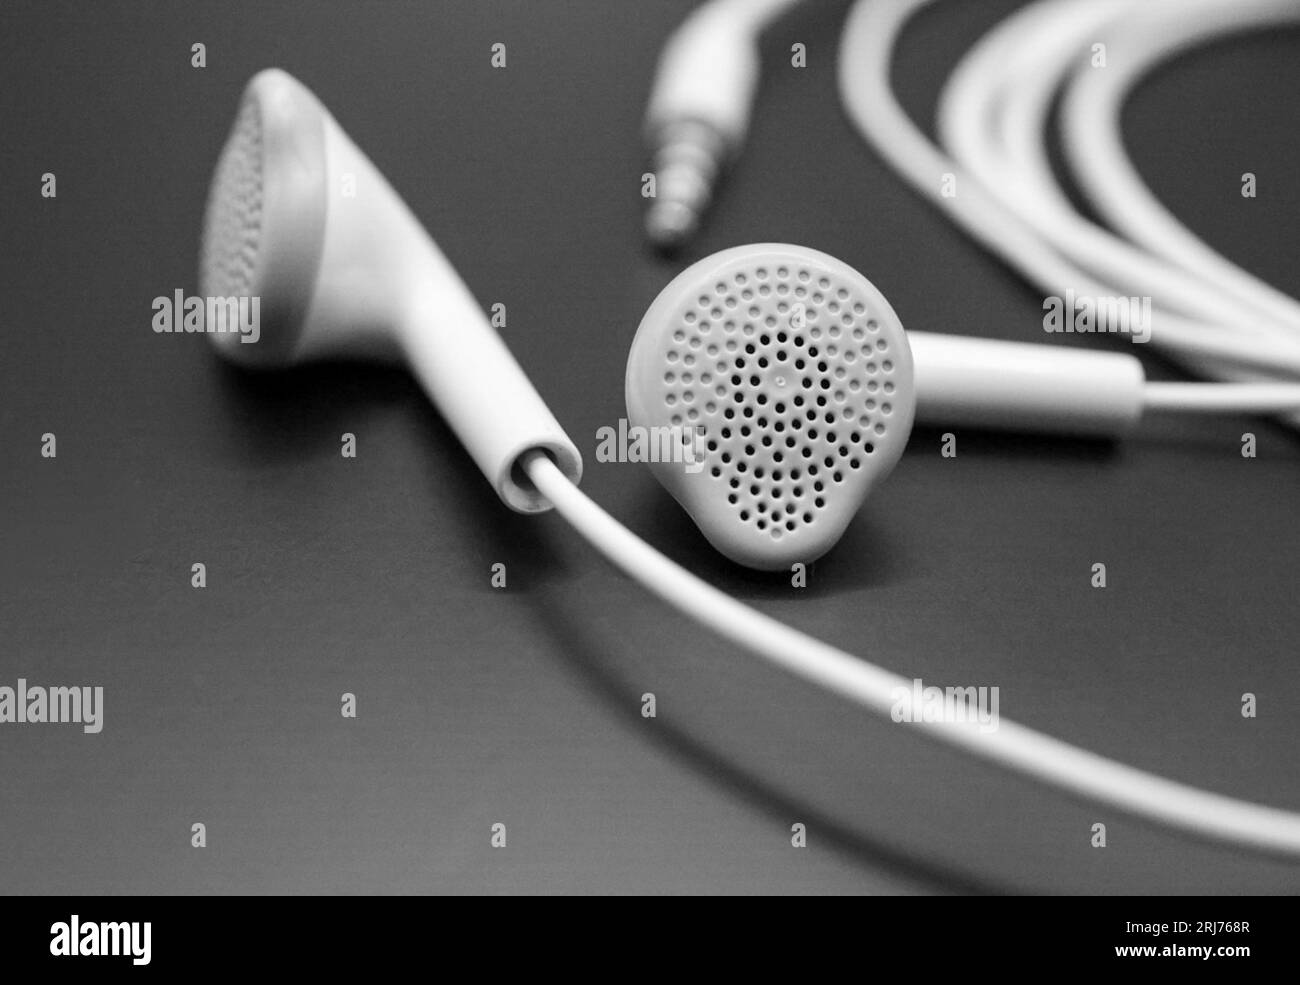 Earphones for mobile devices and tablets Stock Photo